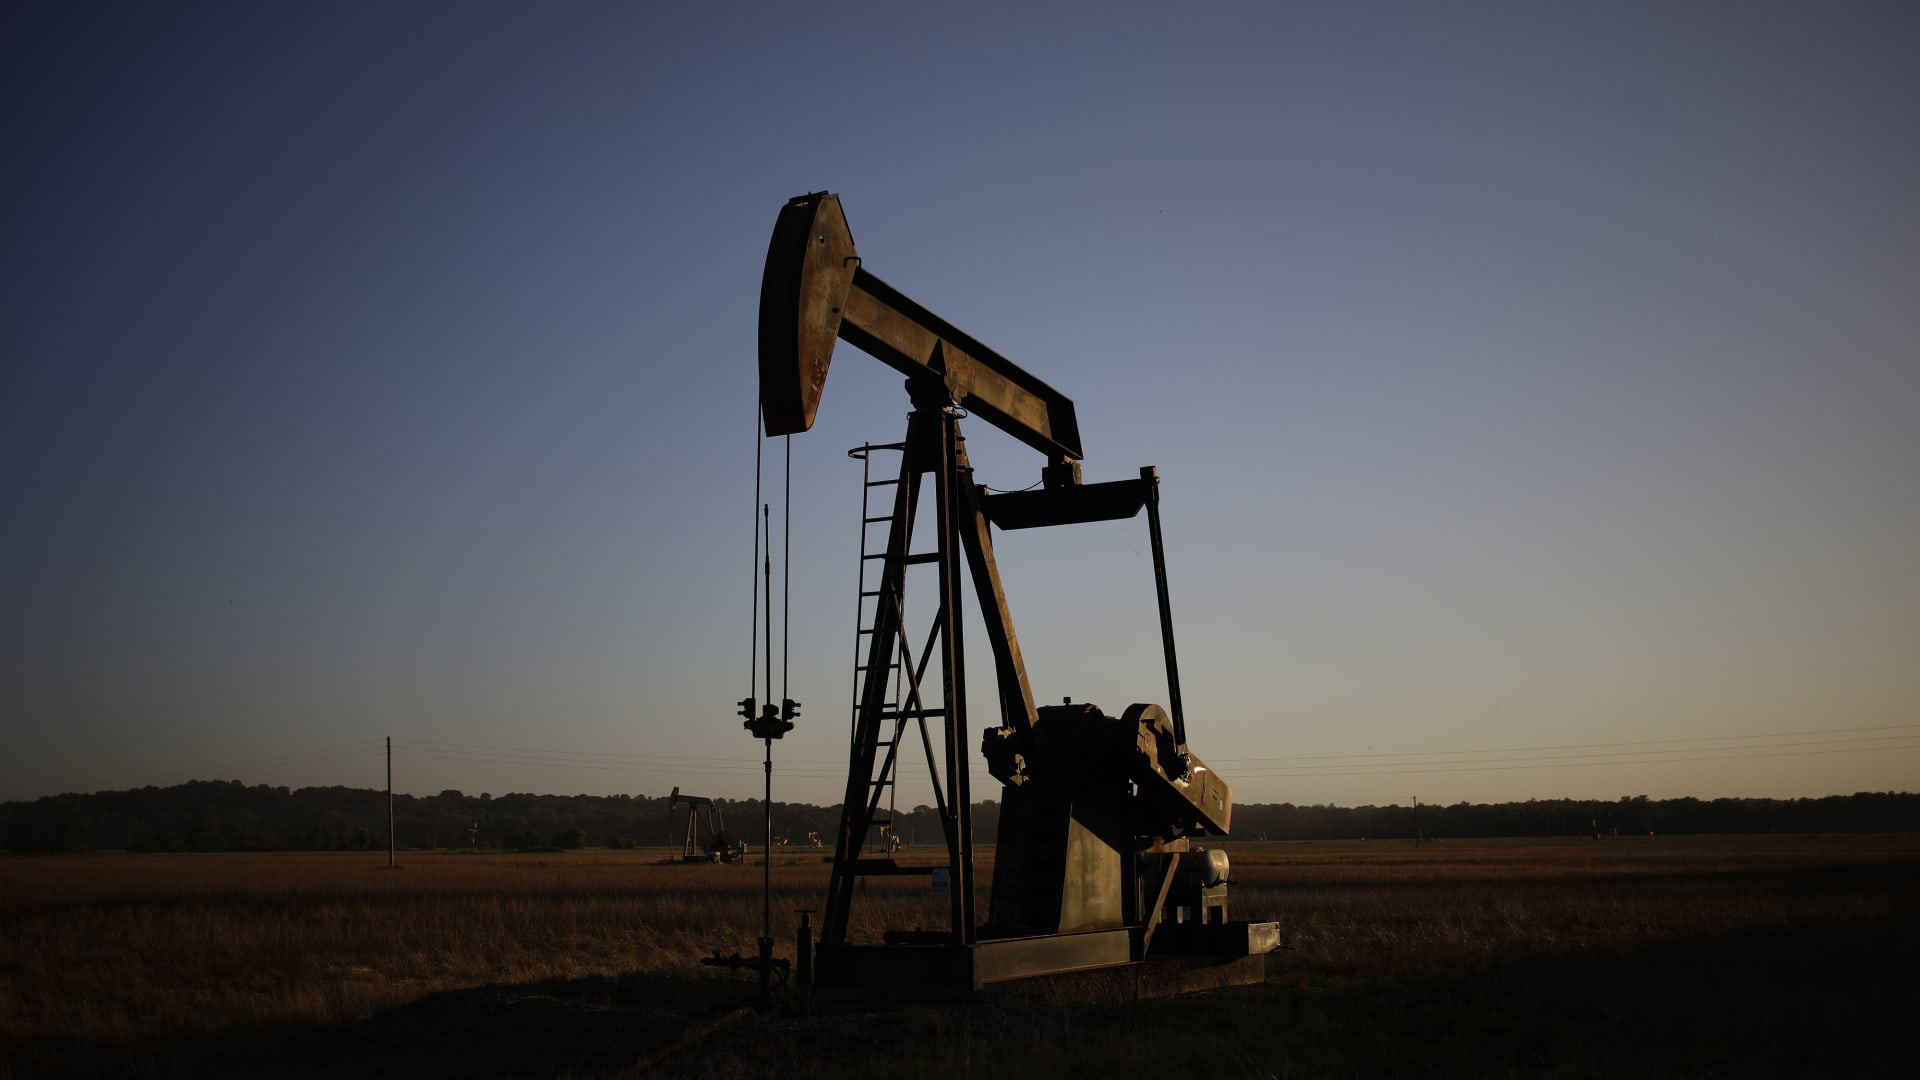 Energy prices have dipped, but oil stocks are still a buy, investor says